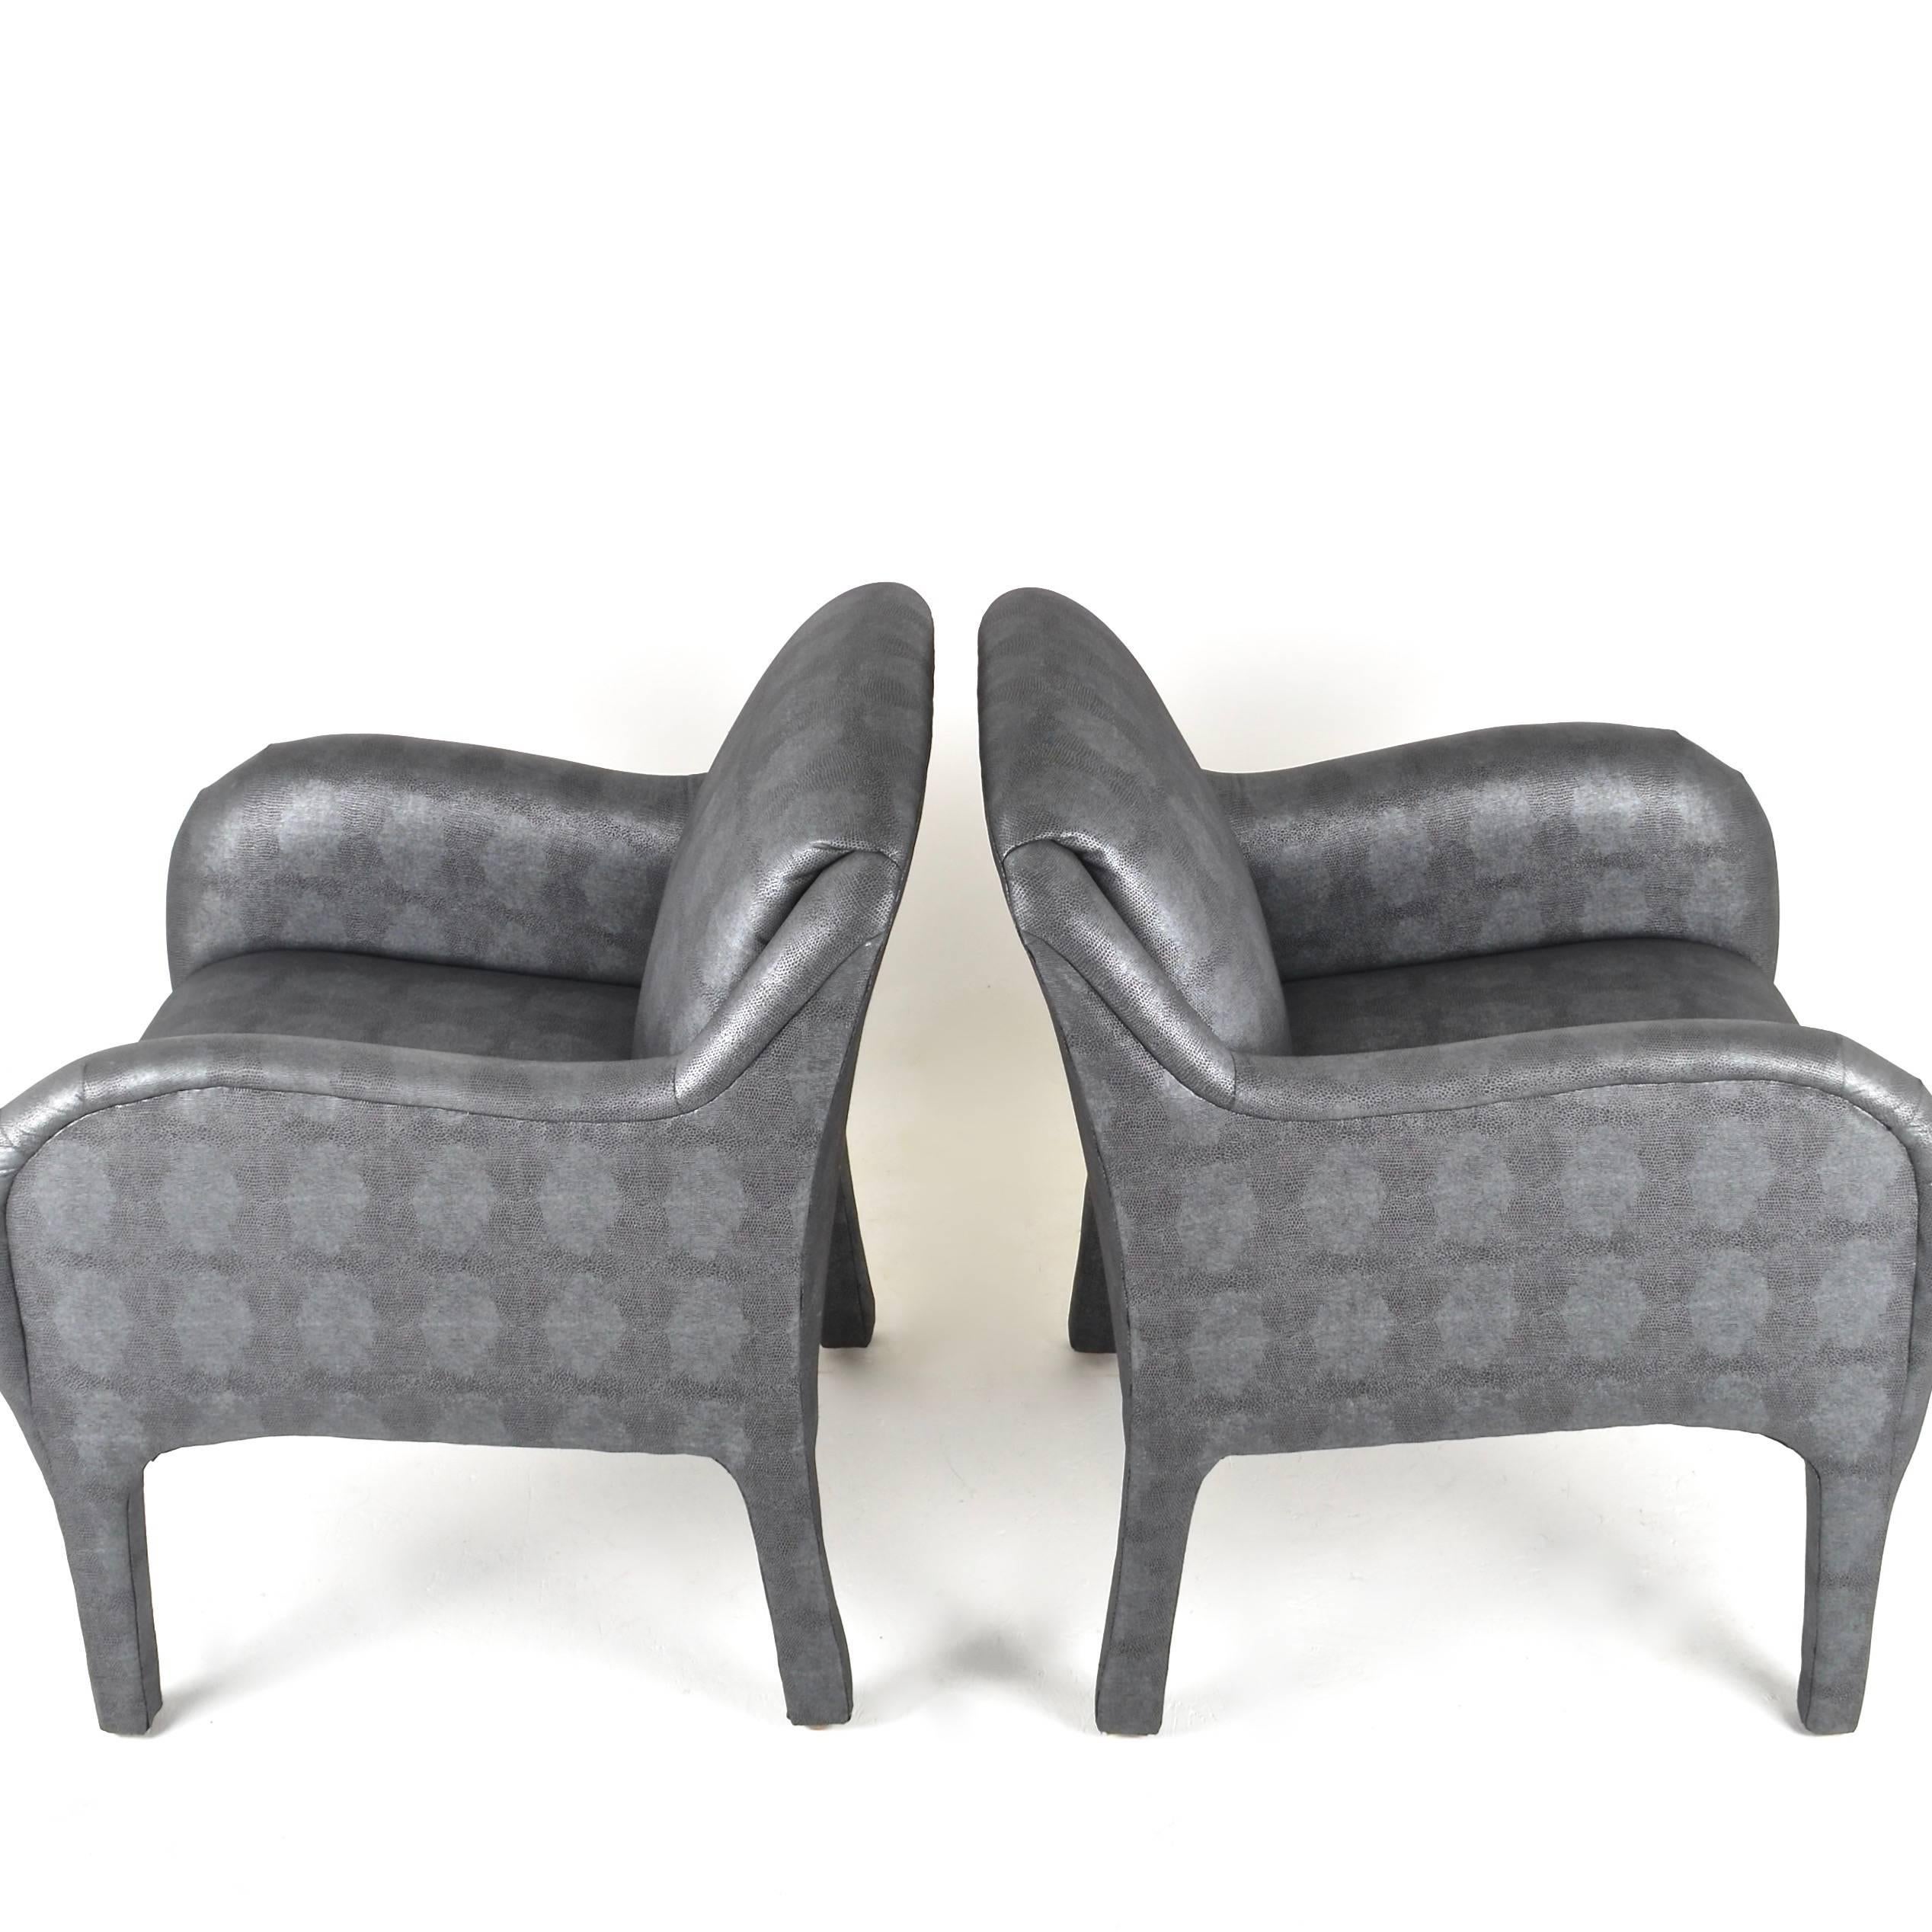 Super chic pair of chairs with metallic shagreen patterned upholstery fabric. In excellent condition.